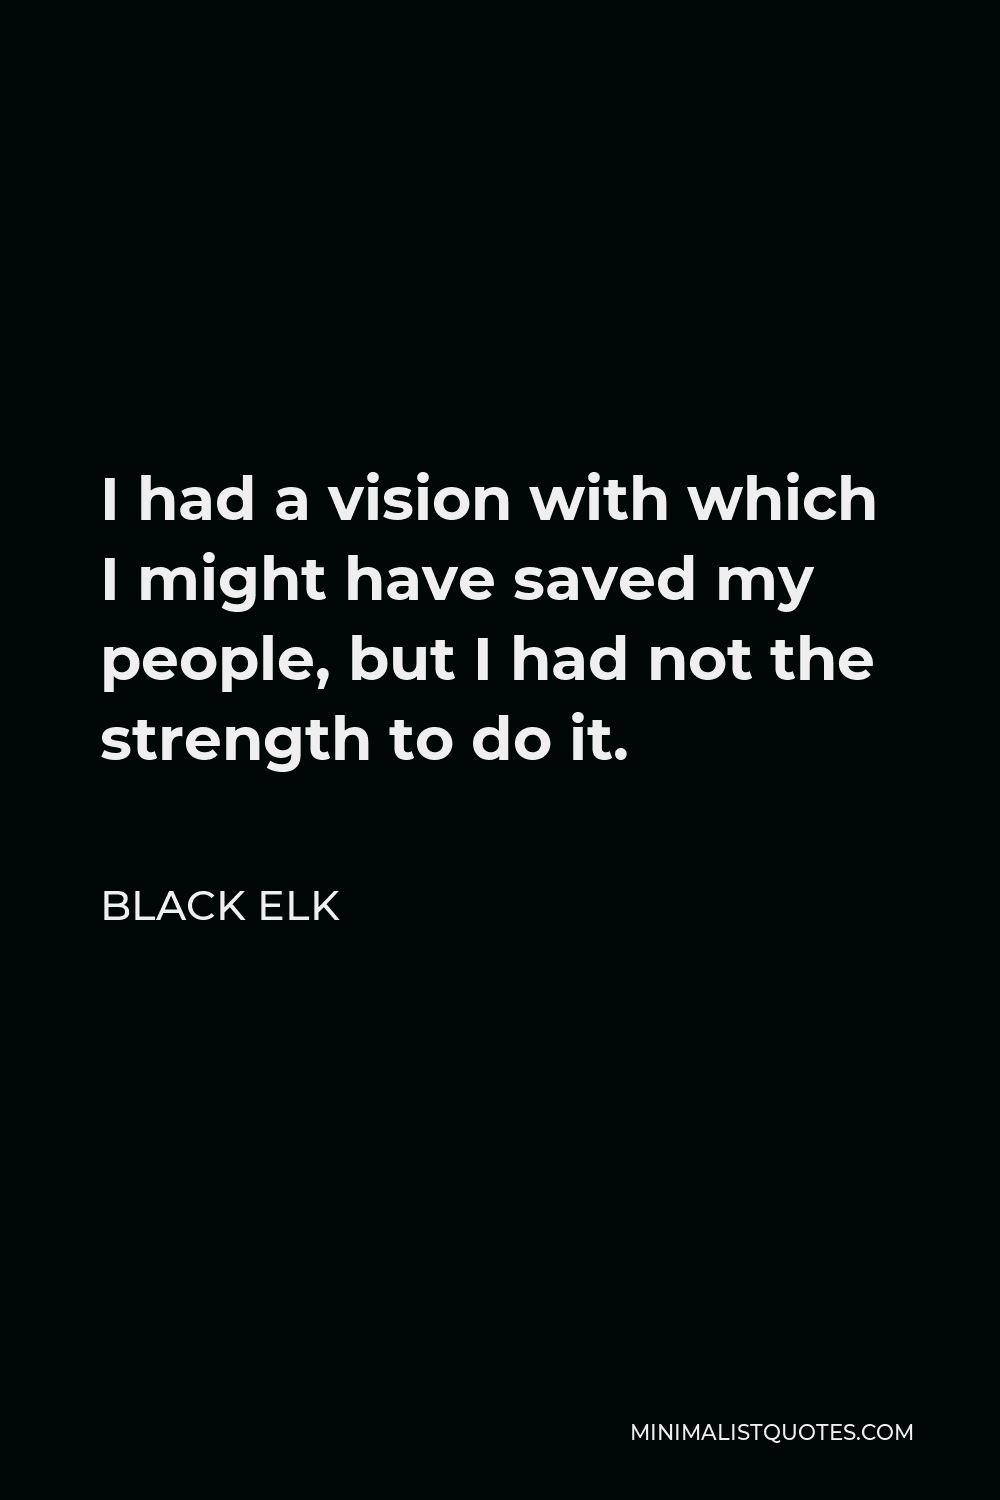 Black Elk Quote - I had a vision with which I might have saved my people, but I had not the strength to do it.